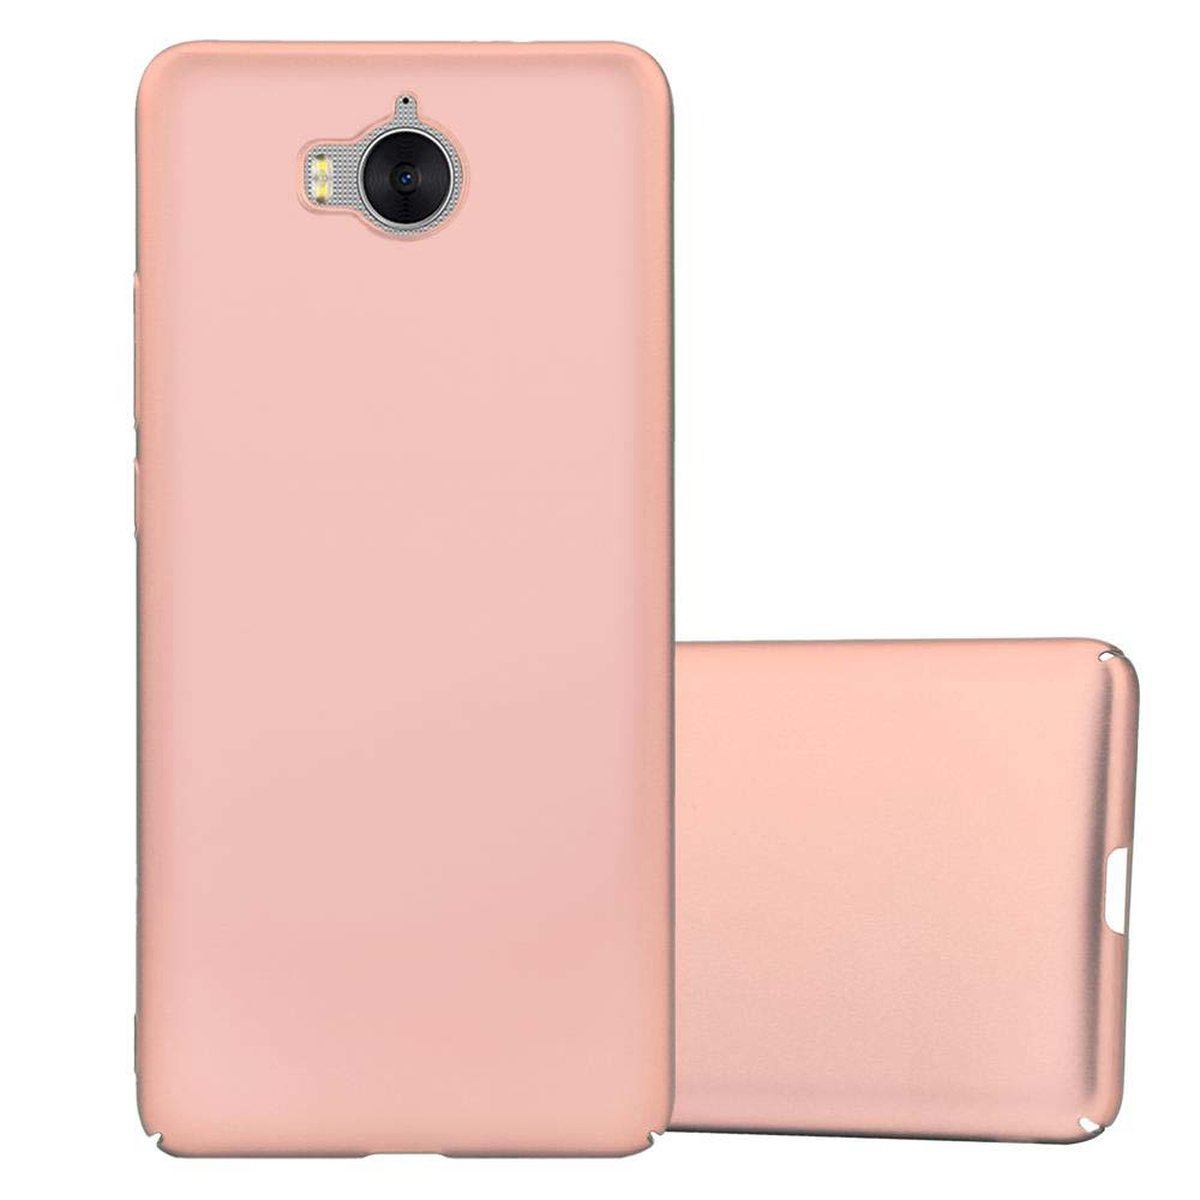 2017 / im Y6 Y5 Matt Case Huawei, GOLD Hülle Metall Hard CADORABO 2017, ROSÉ METALL Style, Backcover,